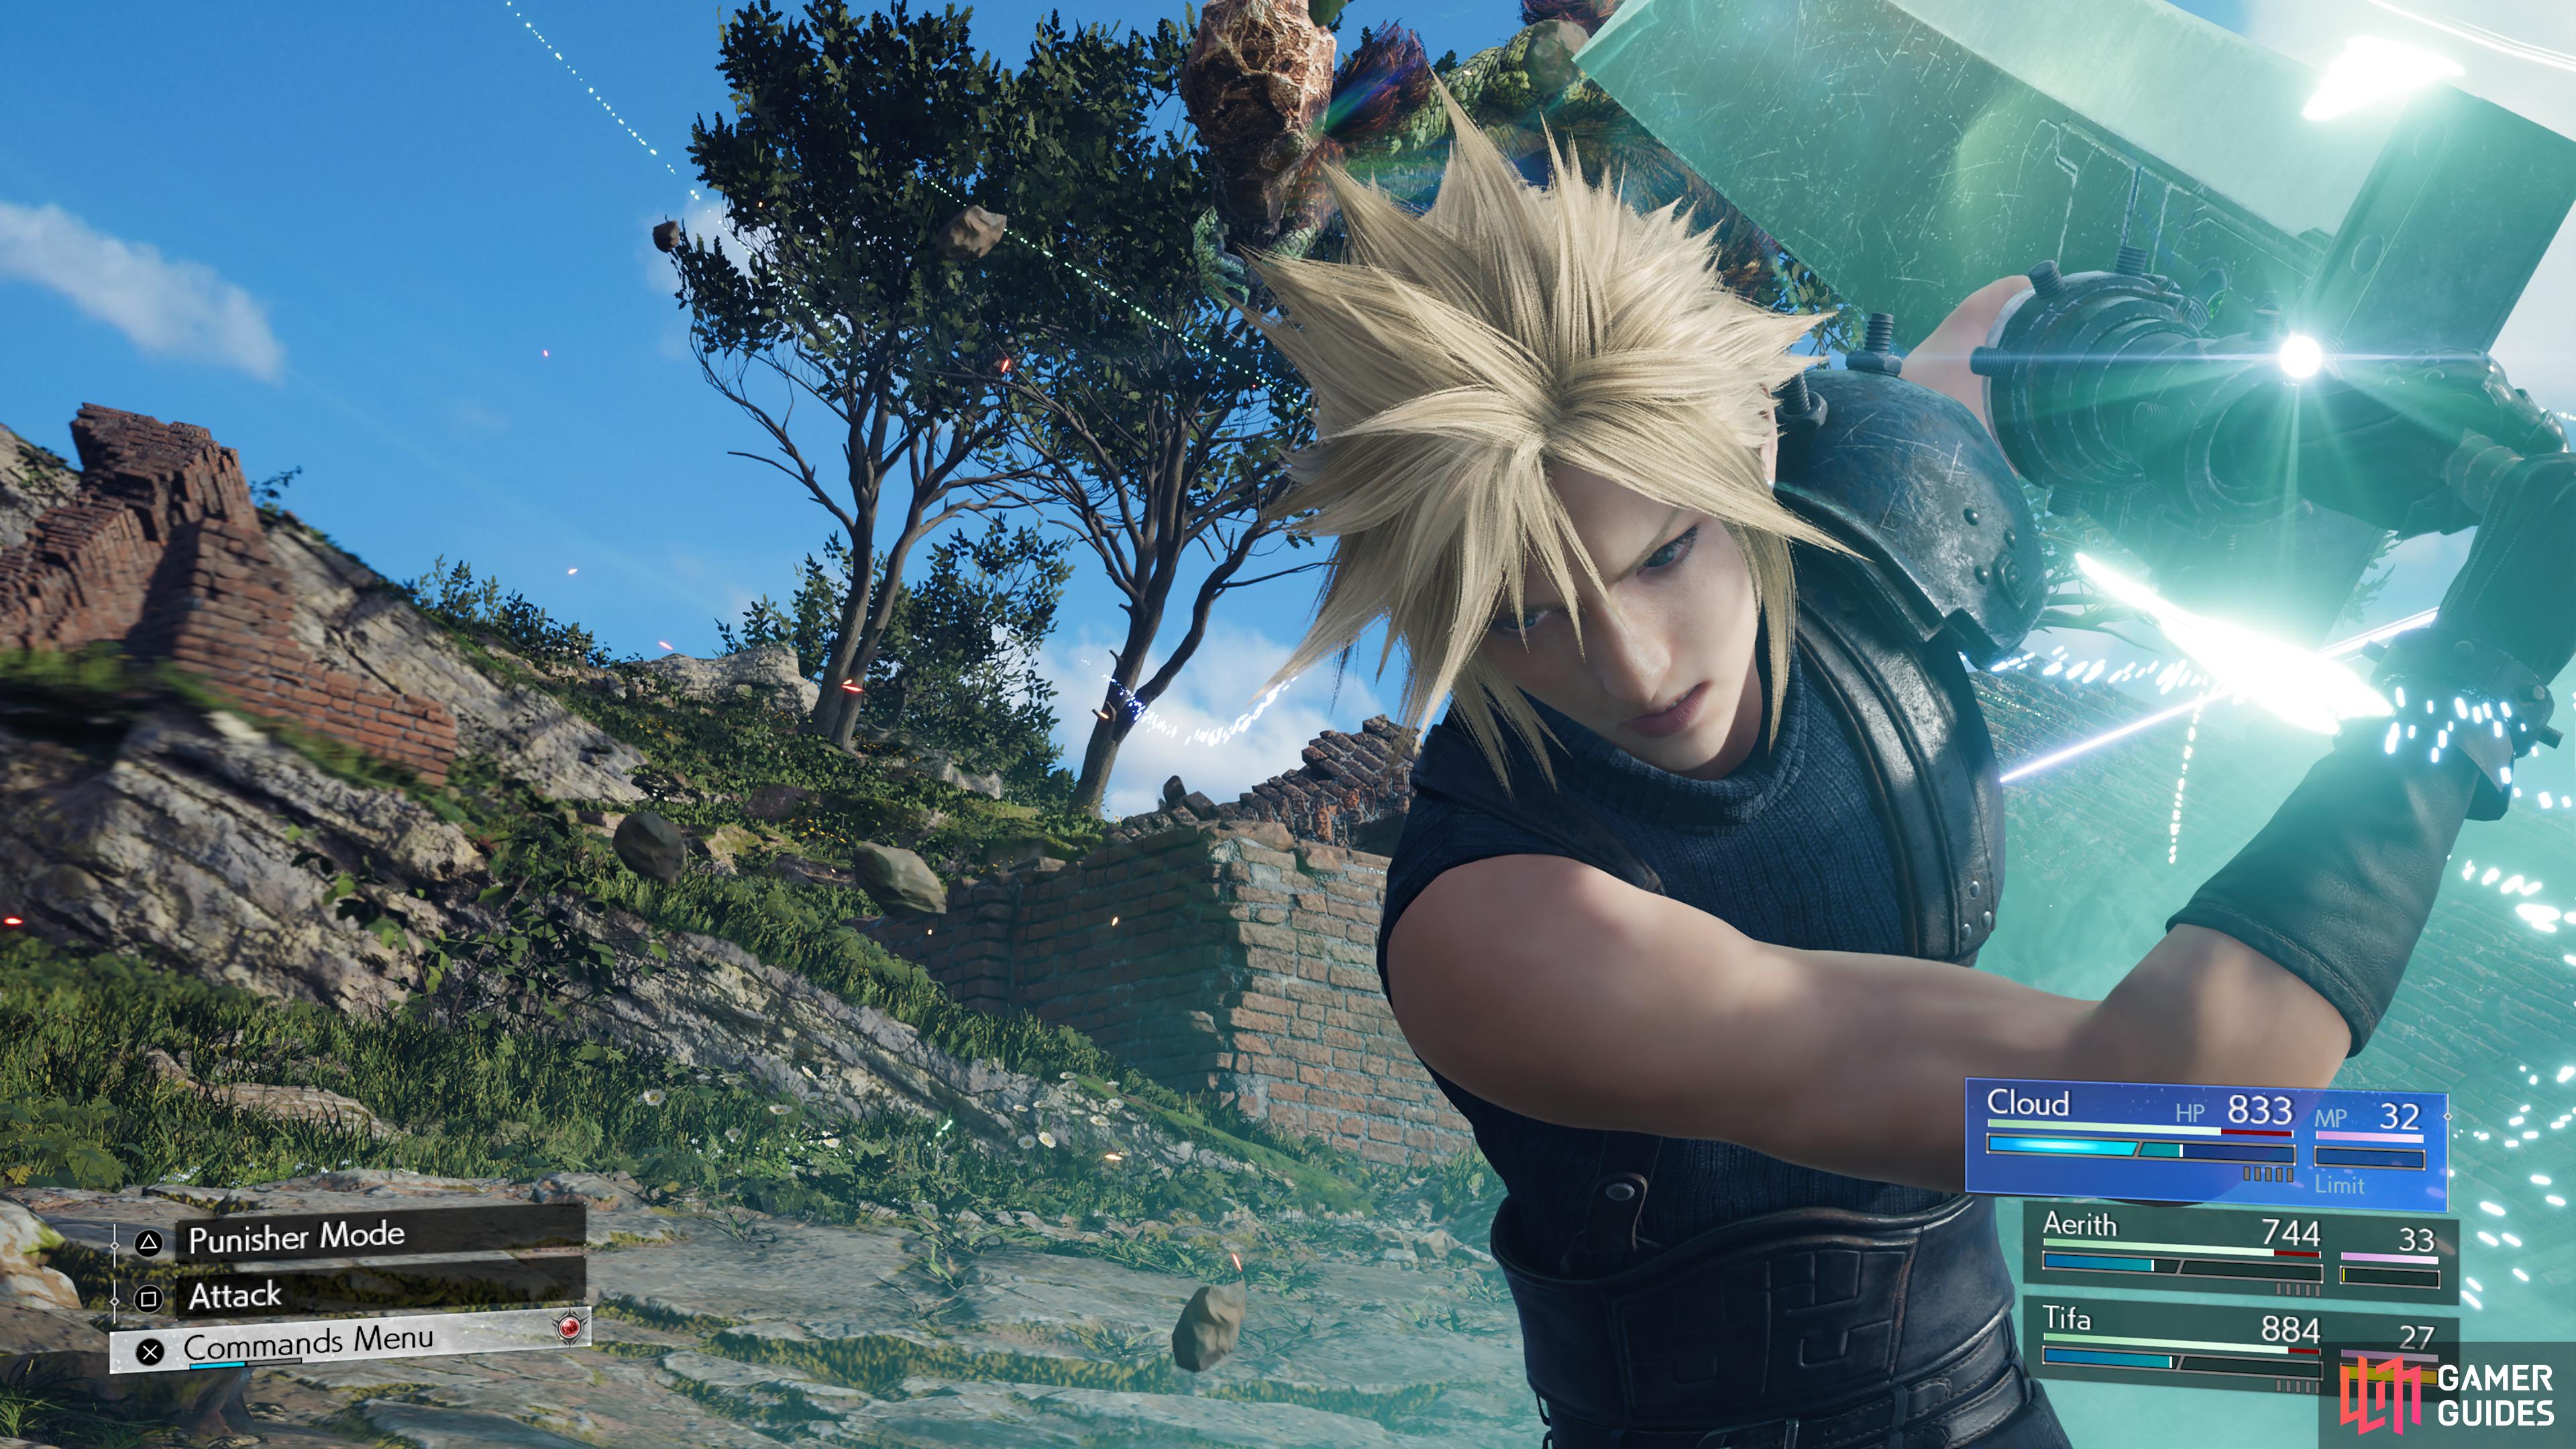 Cloud is the main protagonist of Final Fantasy VII Rebirth.